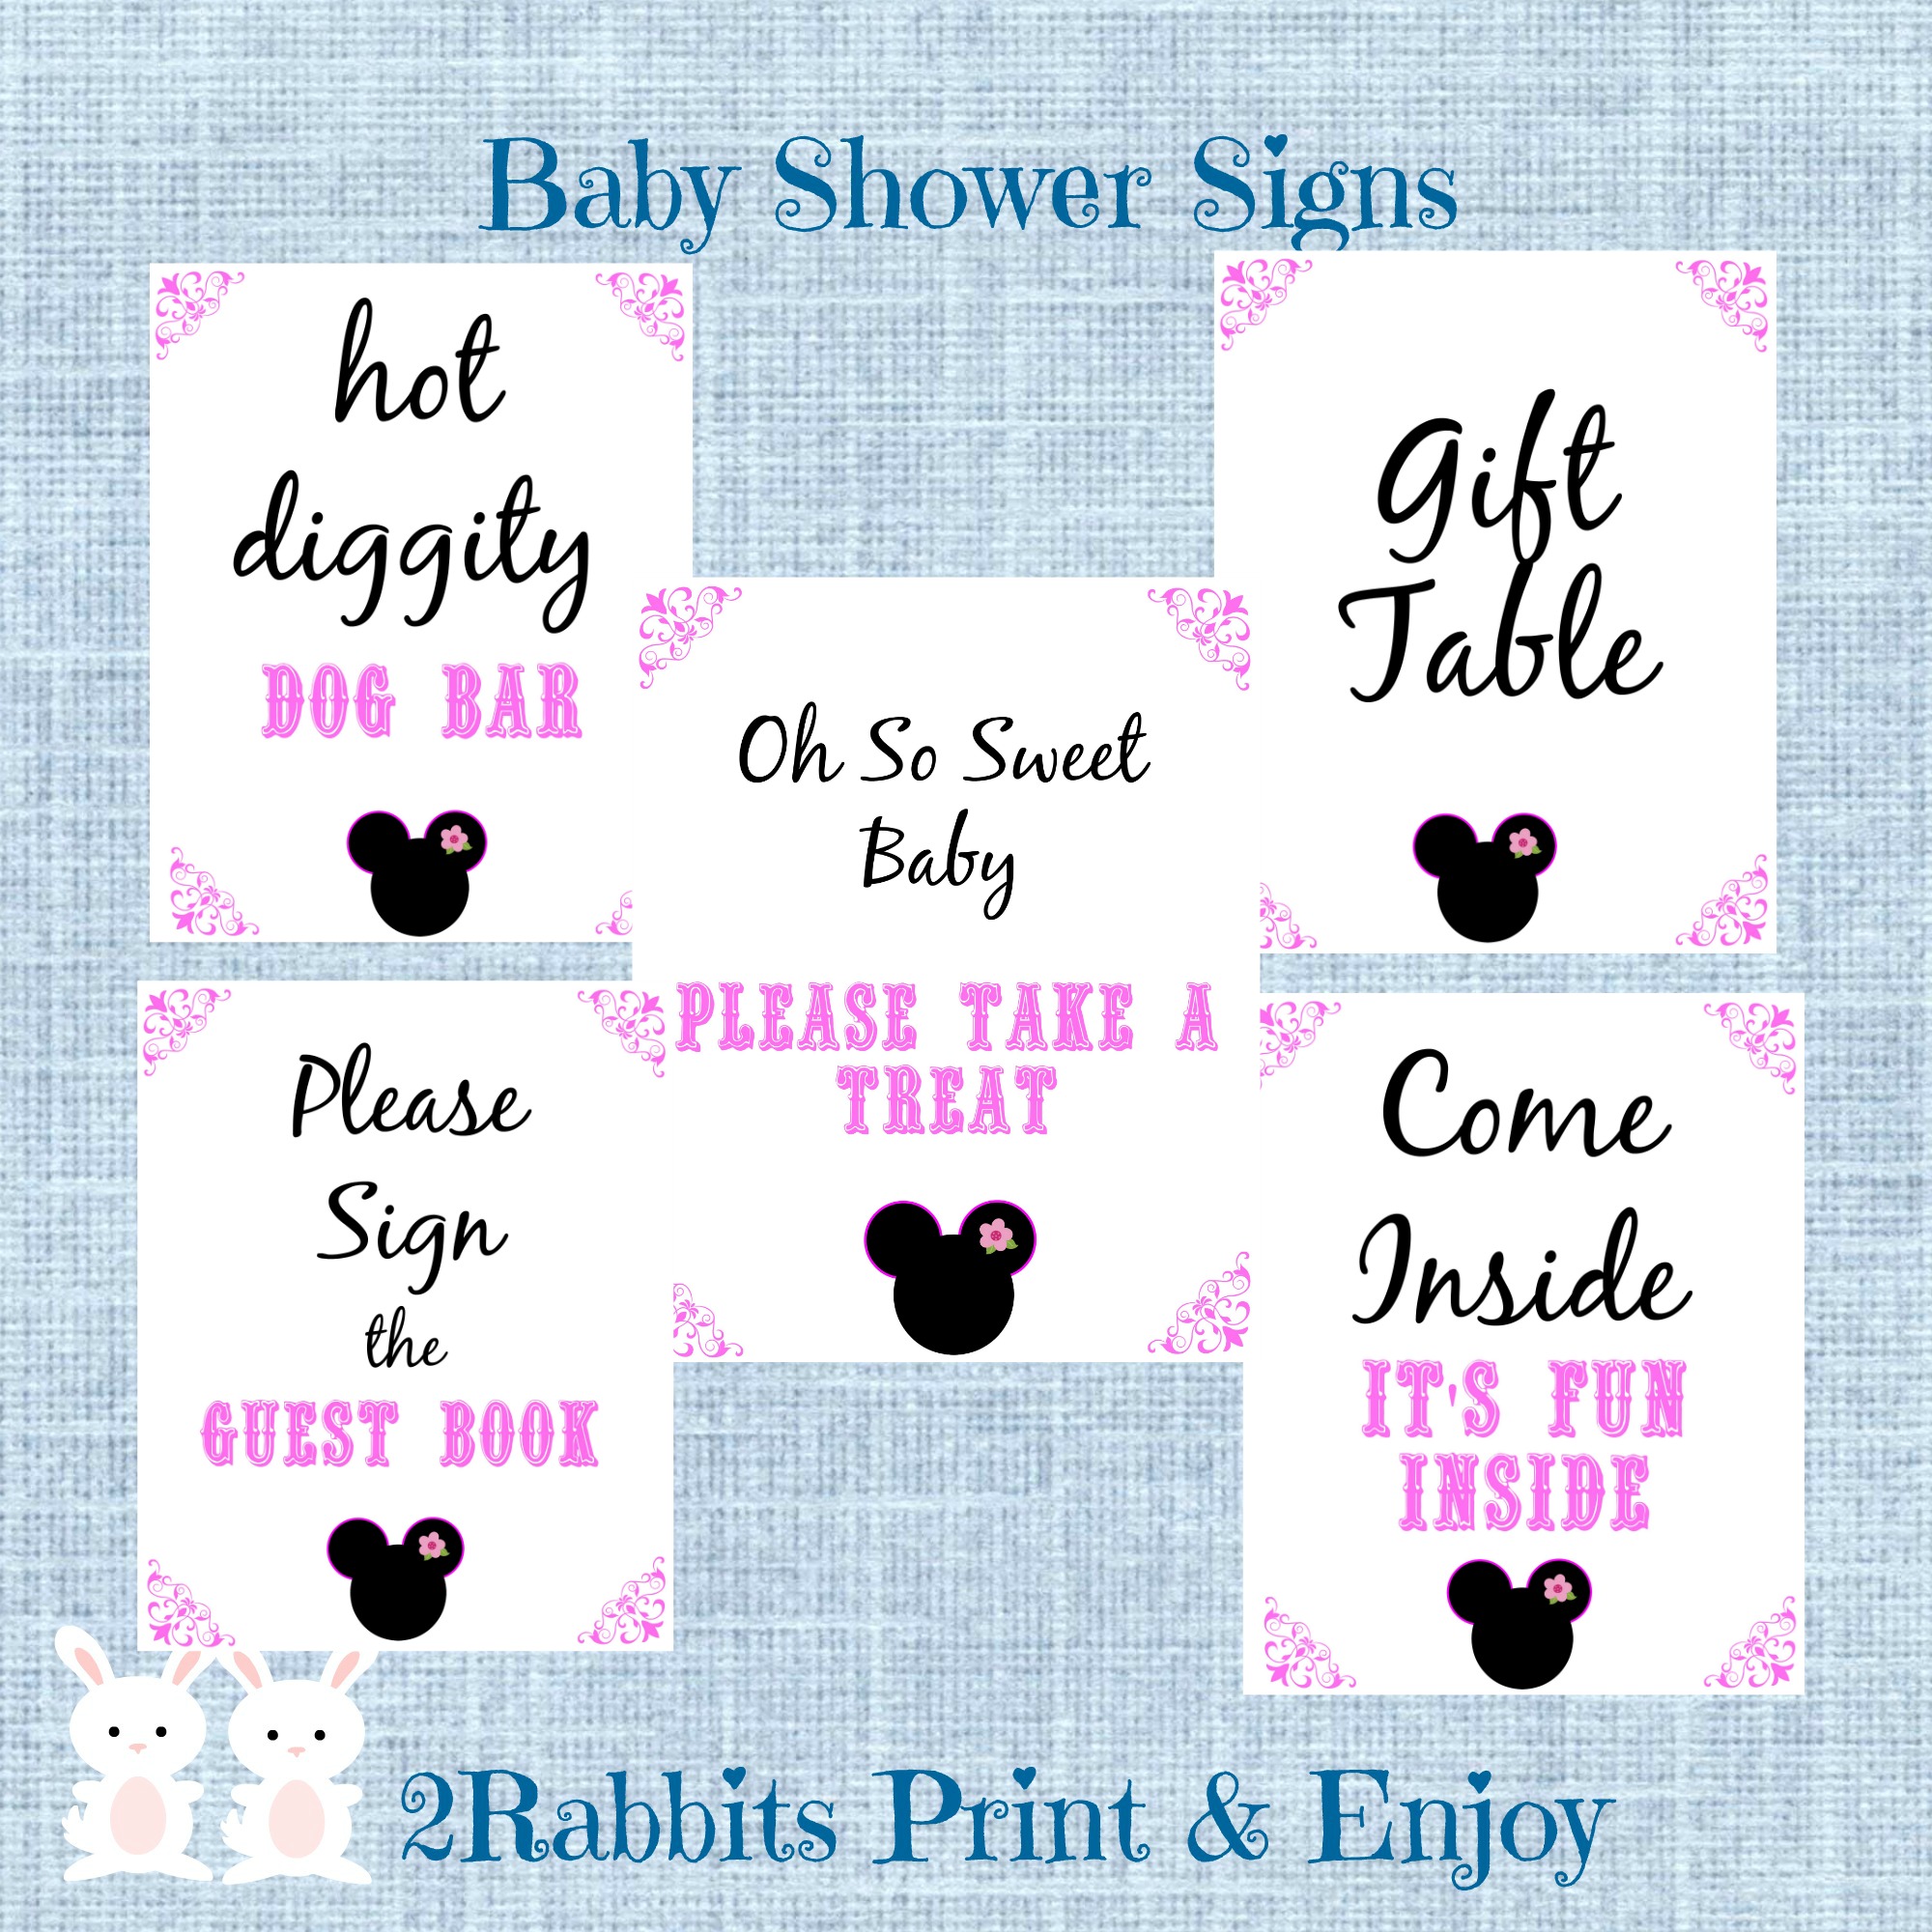 Full Size of Baby Shower:89+ Indulging Baby Shower Banner Picture Inspirations Baby Shower Announcements With Baby Shower Balloons Plus Baby Yager Together With Baby Shower Desserts As Well As Baby Shower Party Ideas